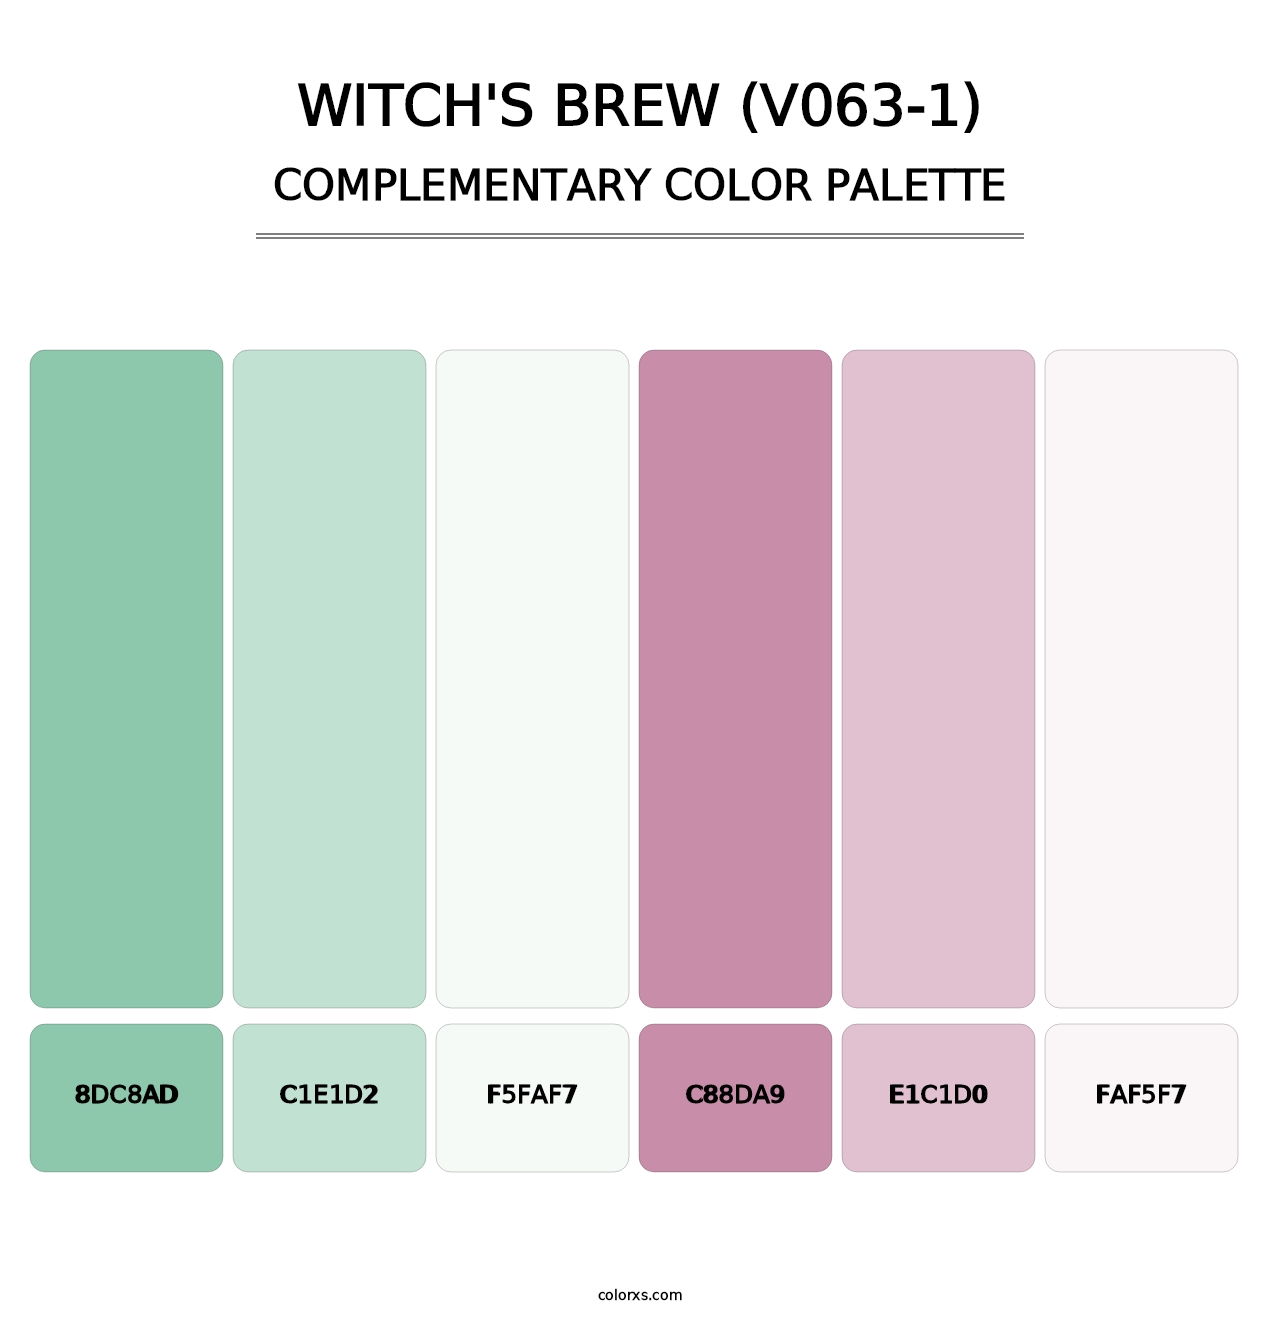 Witch's Brew (V063-1) - Complementary Color Palette